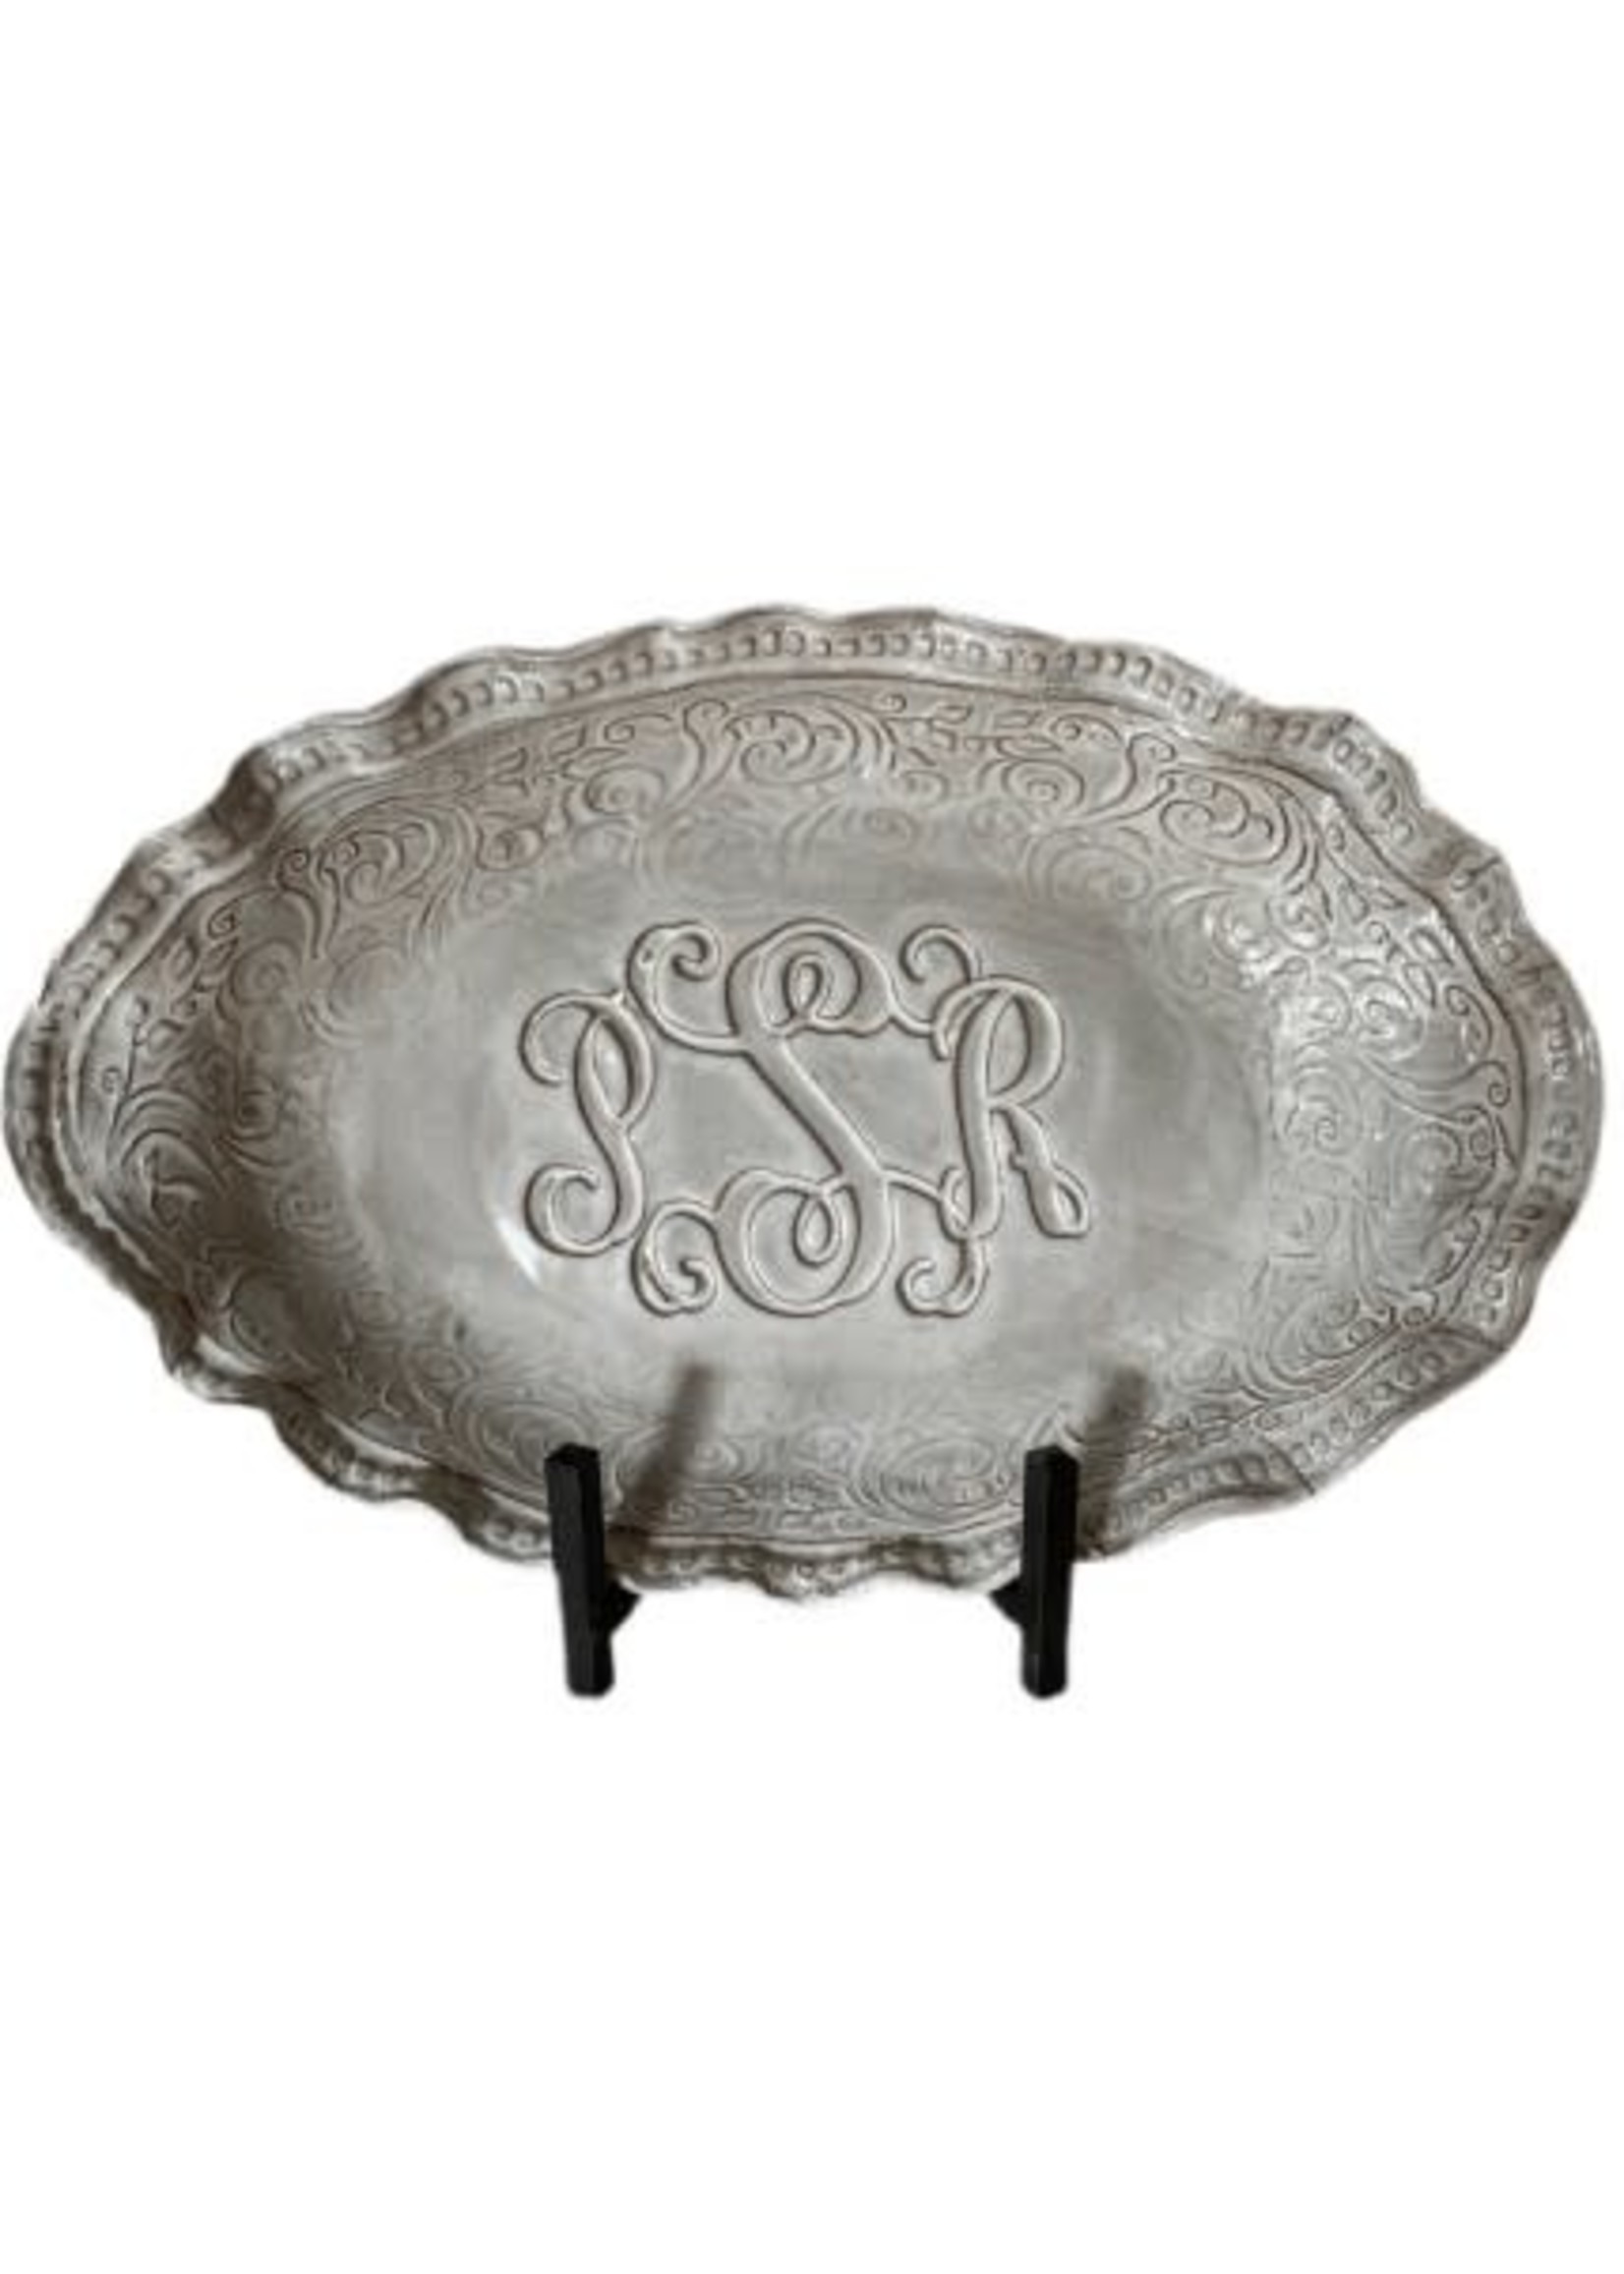 Dixie Pottery Lizzy Veronica Serving Tray Monogrammed